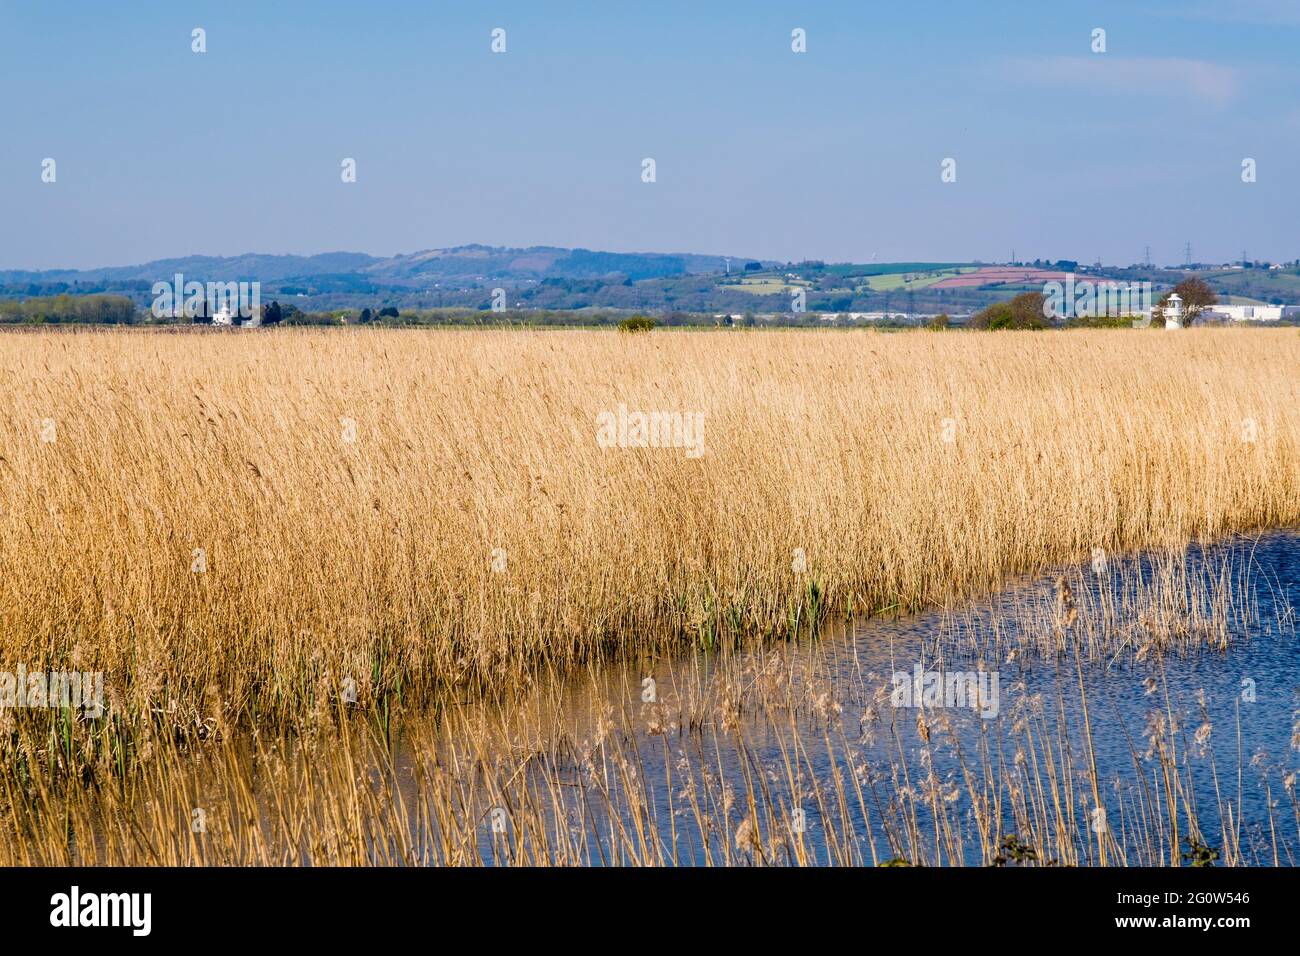 Pool and reeds on Caldicot Level of Gwent levels at Newport Wetlands National Nature Reserve with Uskmouth power station. Nash Newport Gwent Wales UK Stock Photo